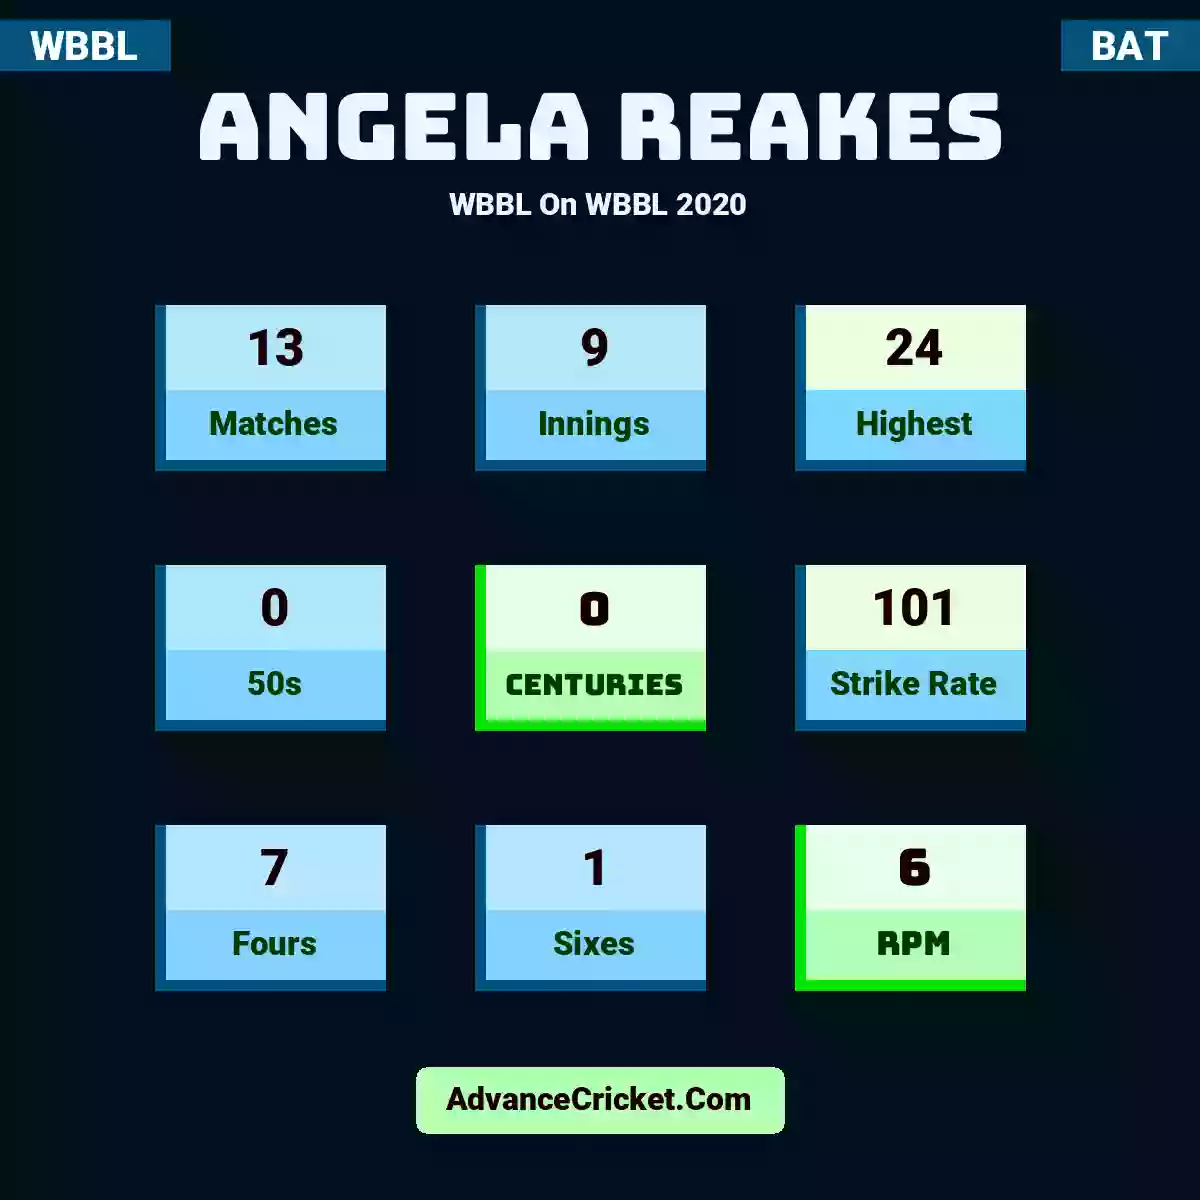 Angela Reakes WBBL  On WBBL 2020, Angela Reakes played 13 matches, scored 24 runs as highest, 0 half-centuries, and 0 centuries, with a strike rate of 101. A.Reakes hit 7 fours and 1 sixes, with an RPM of 6.